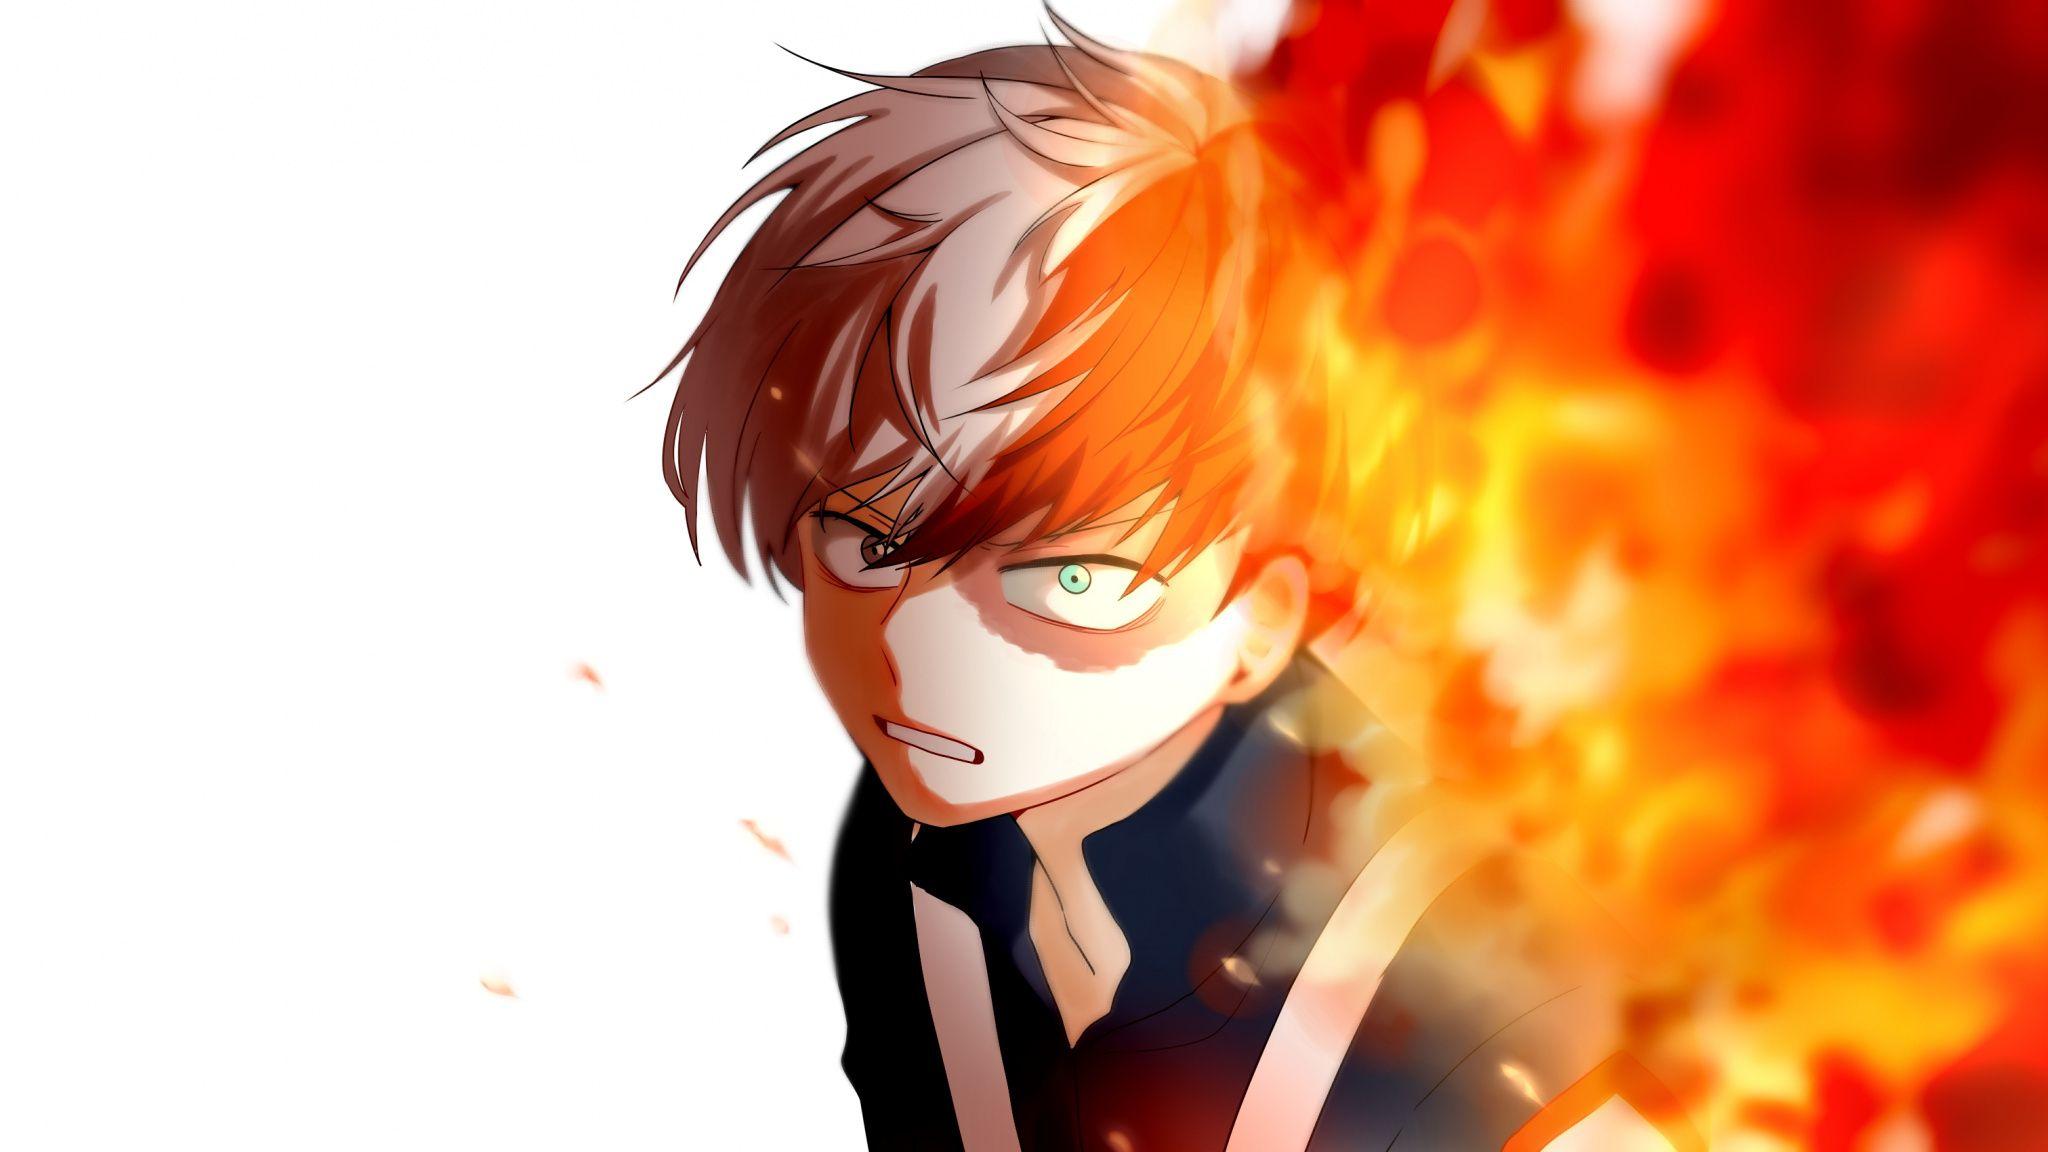 48x1152 Fire Anime Wallpapers Top Free 48x1152 Fire Anime Backgrounds Wallpaperaccess